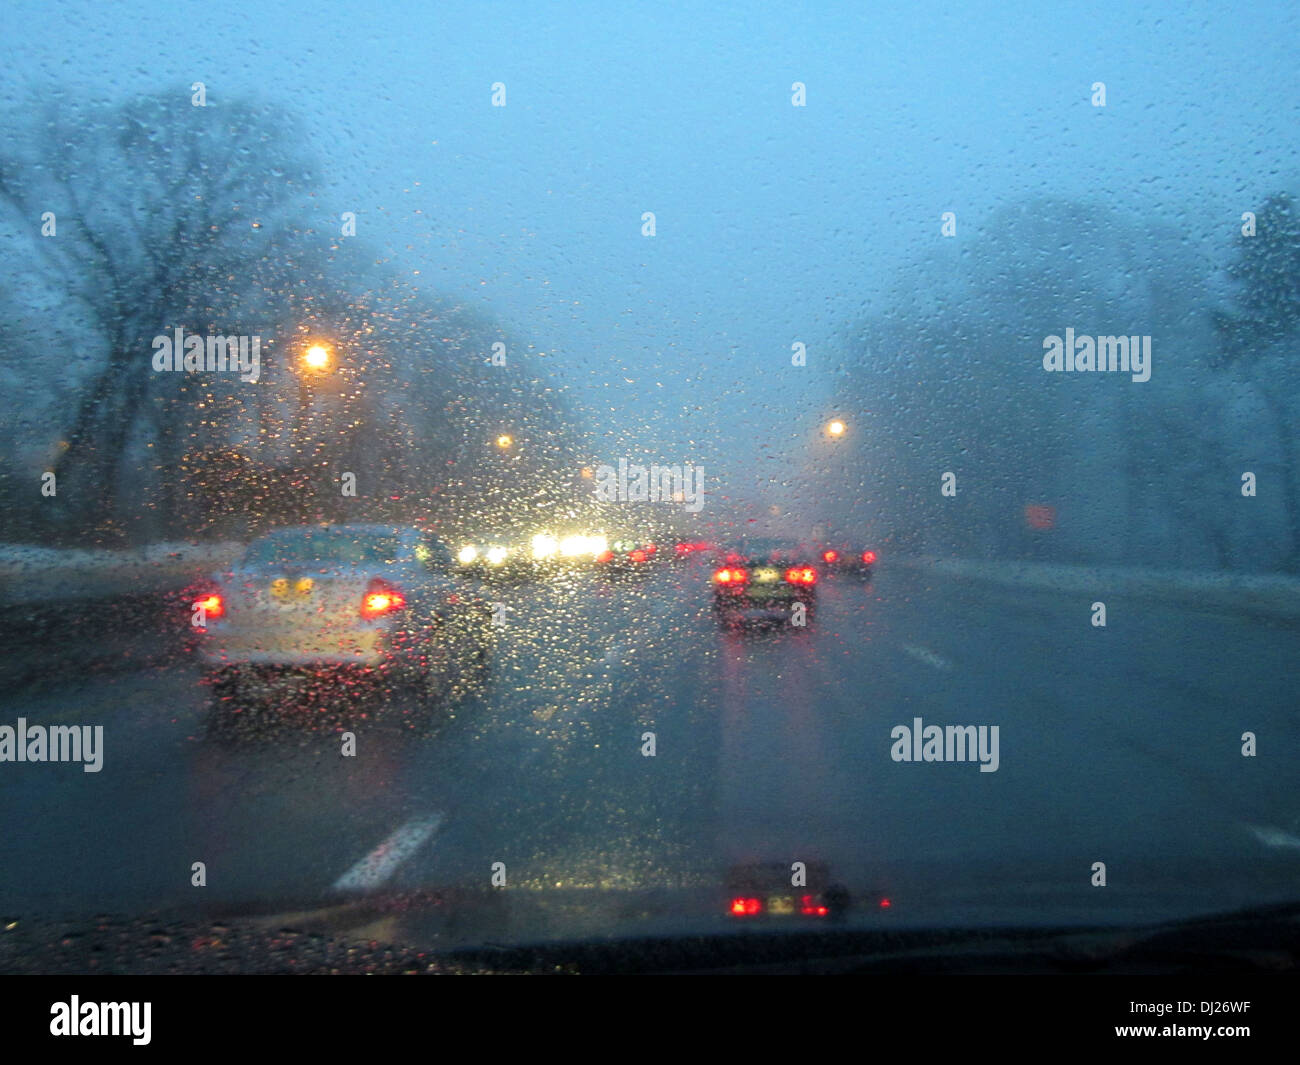 Driving on a highway at dusk in rush hour traffic with rain and mist gathering on the windshield. Stock Photo